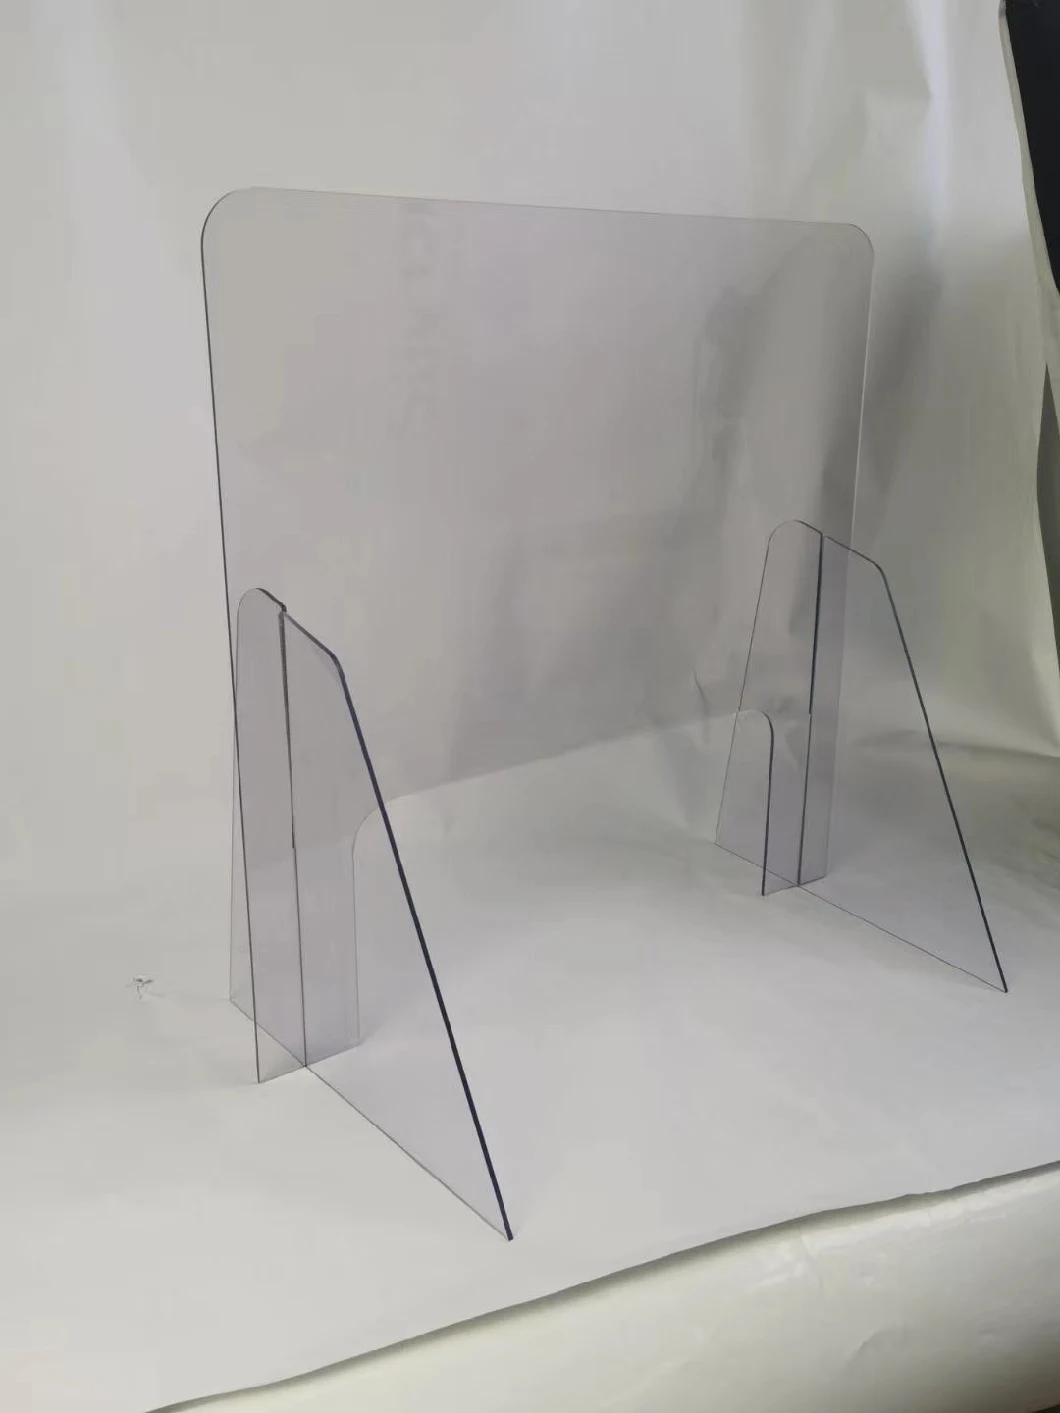 New Acrylic Sneeze Guard for Desk Clear Acrylic Sneeze Guard